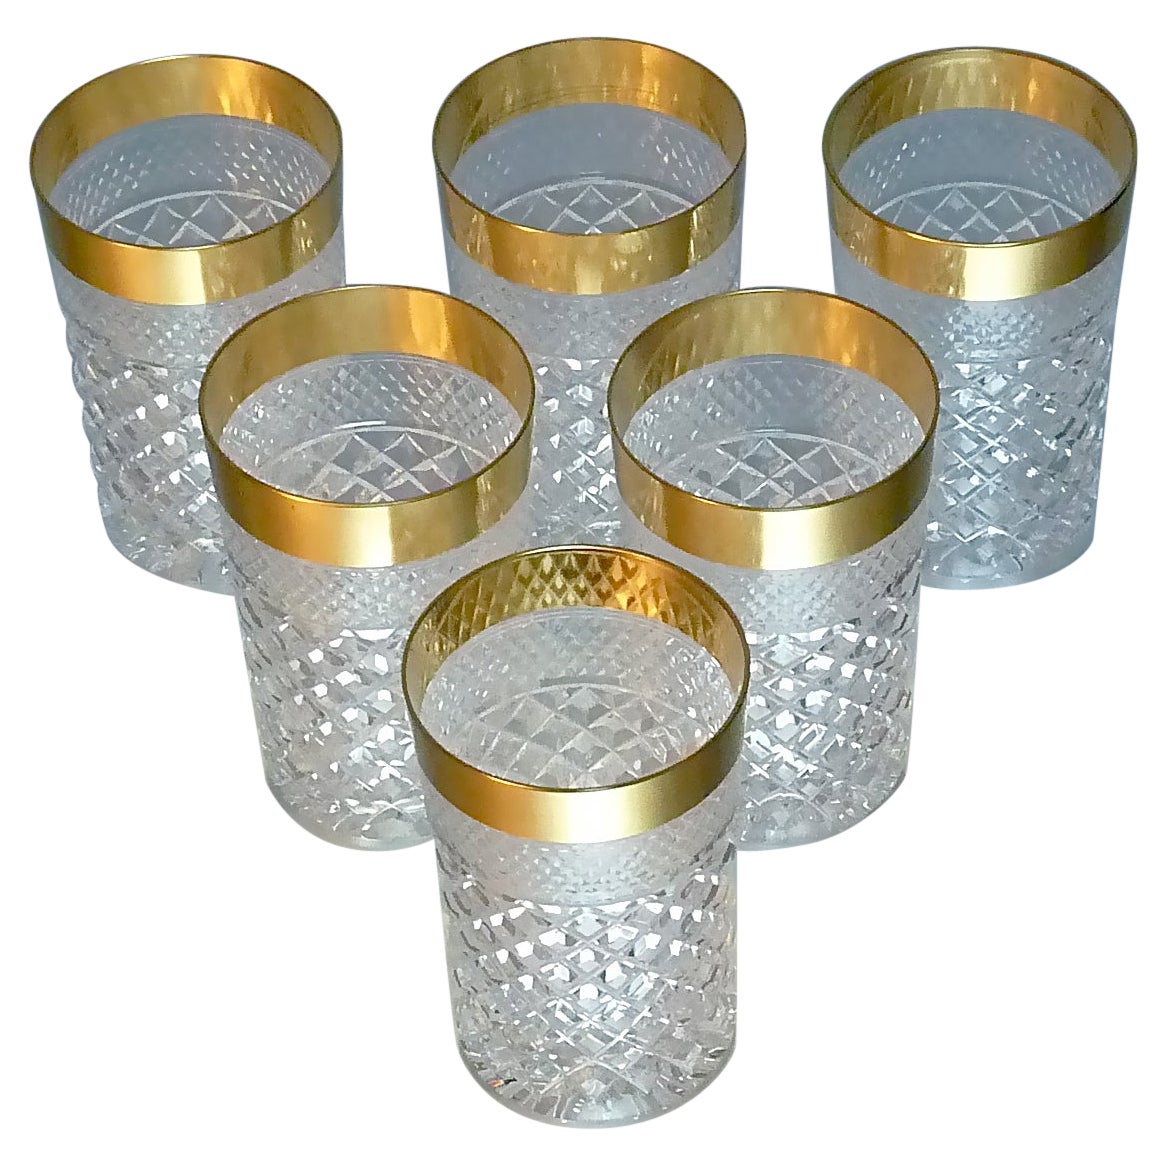 Precious 6 Water Glasses Gold Crystal Glass Tumbler Josephinenhuette Moser For Sale